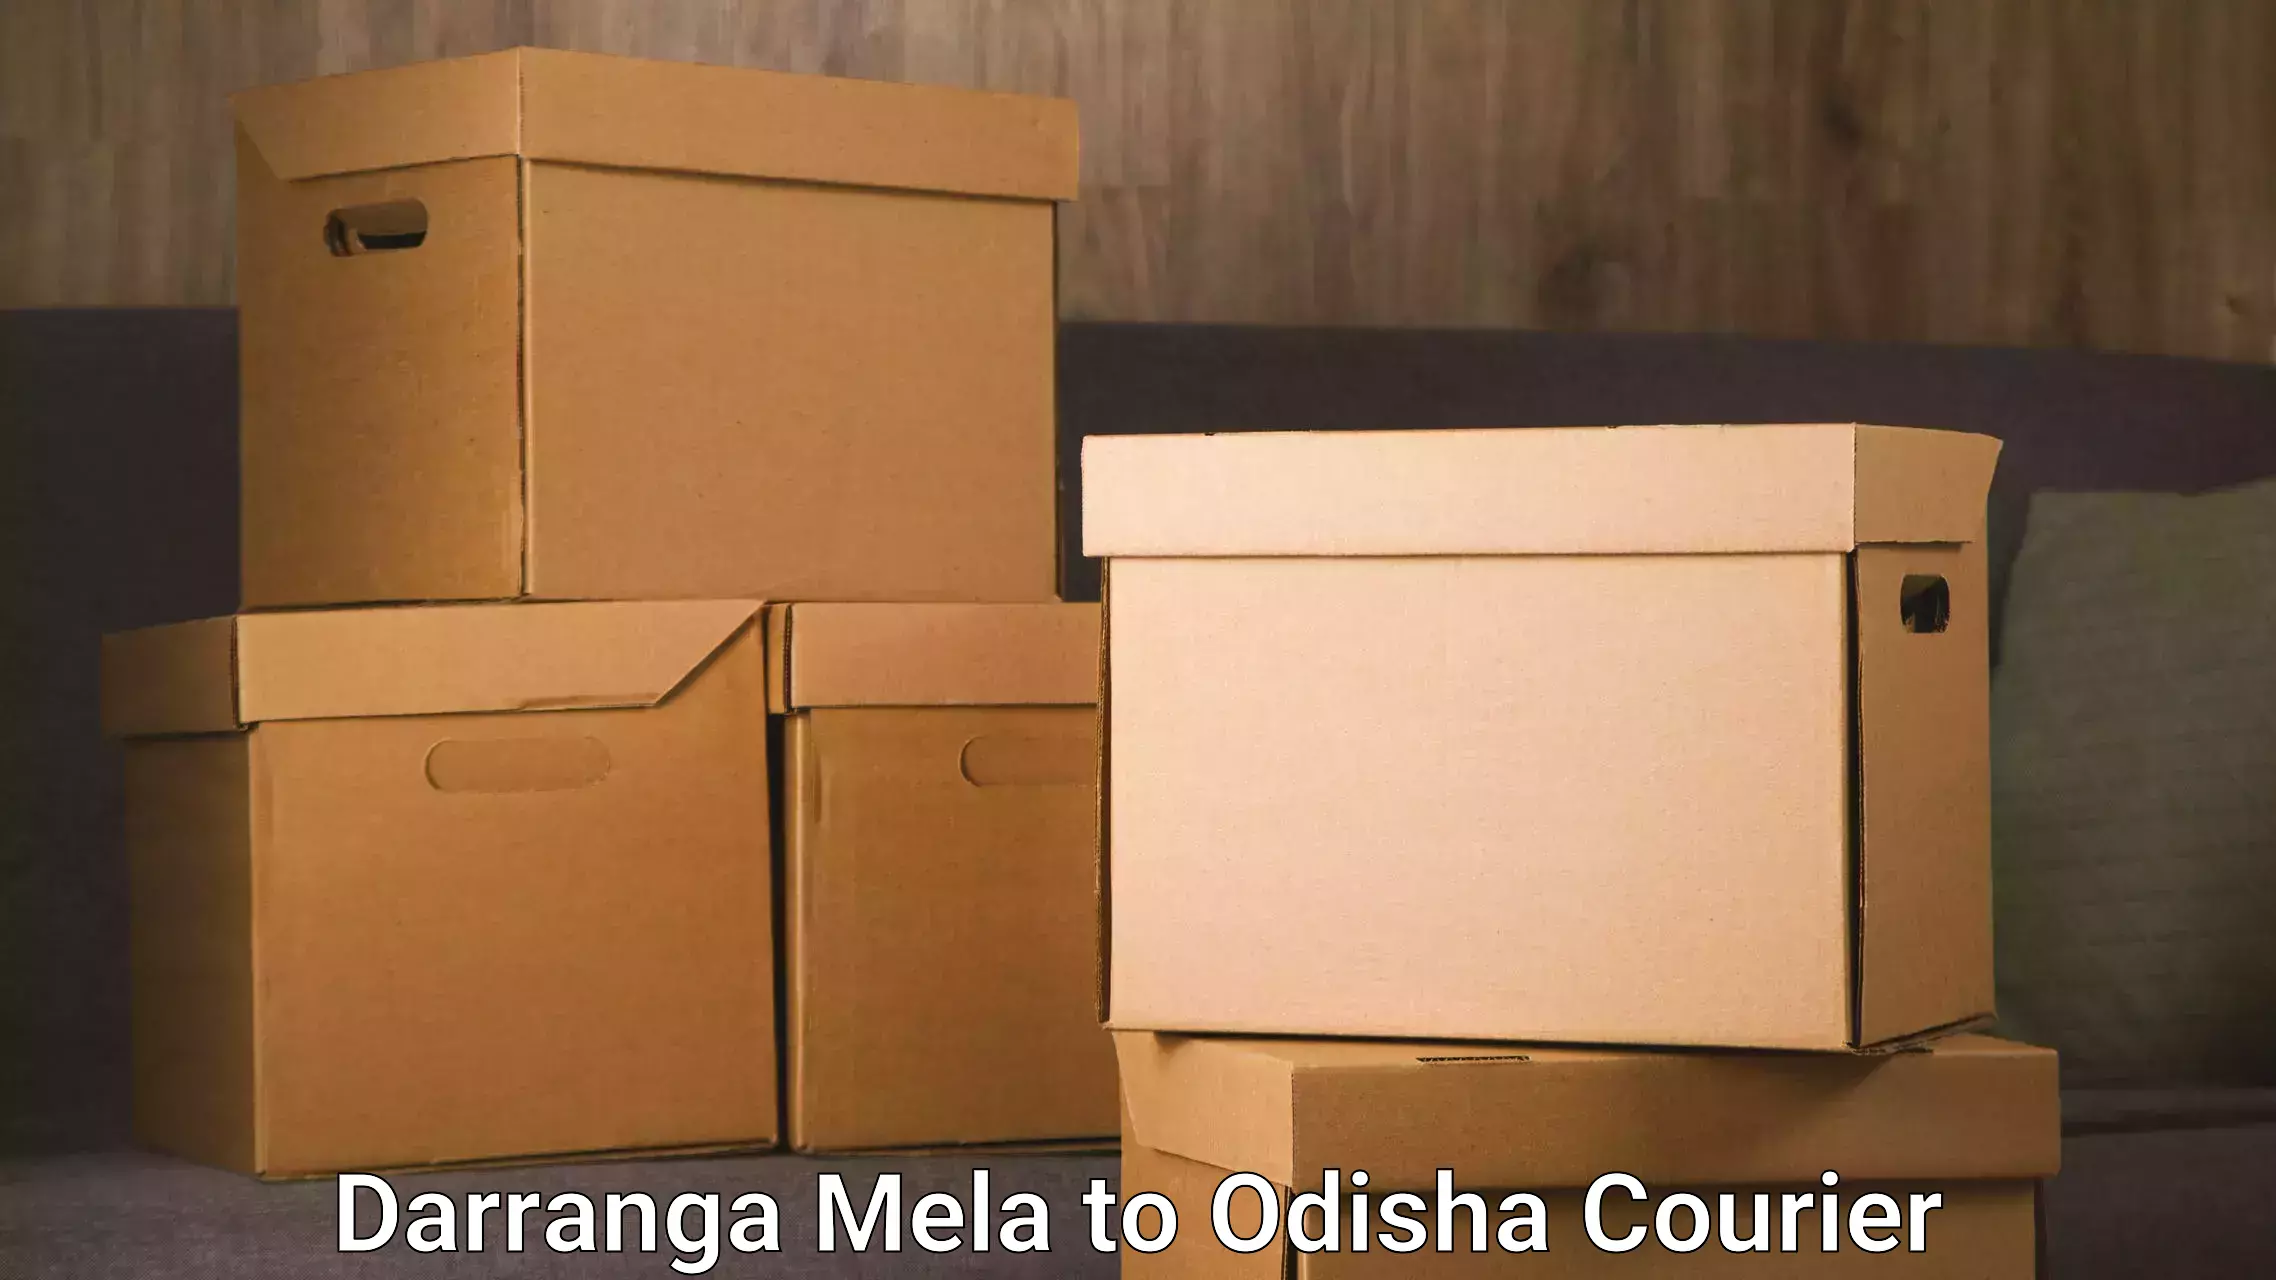 Express package delivery Darranga Mela to Behrampur